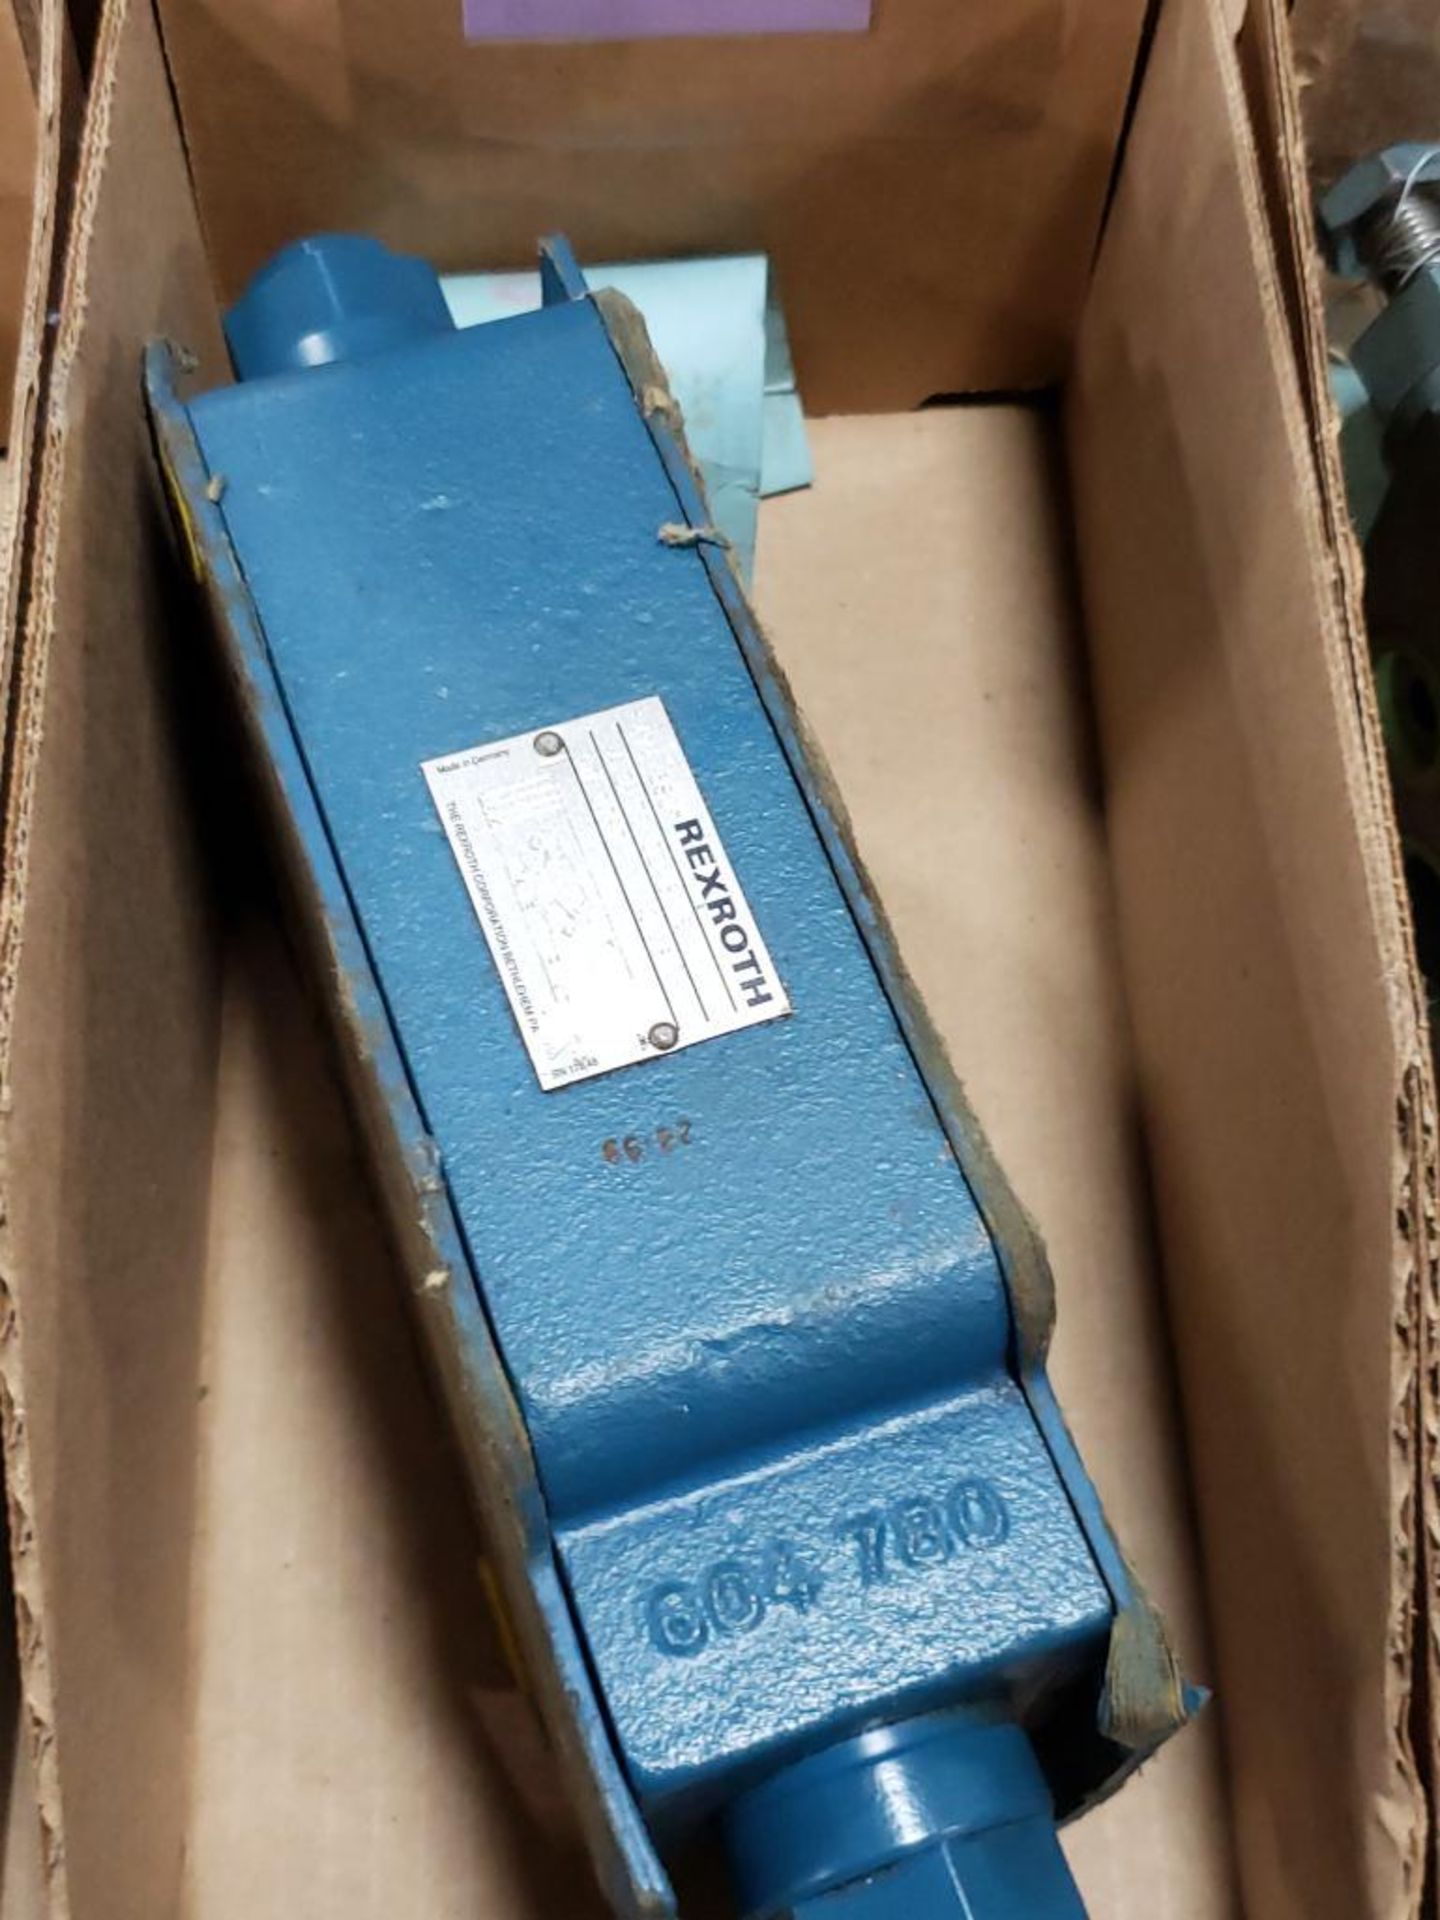 Rexroth hydraulic valve body. Part number Z2FS22-31/S/V. Appears to be new old stock.